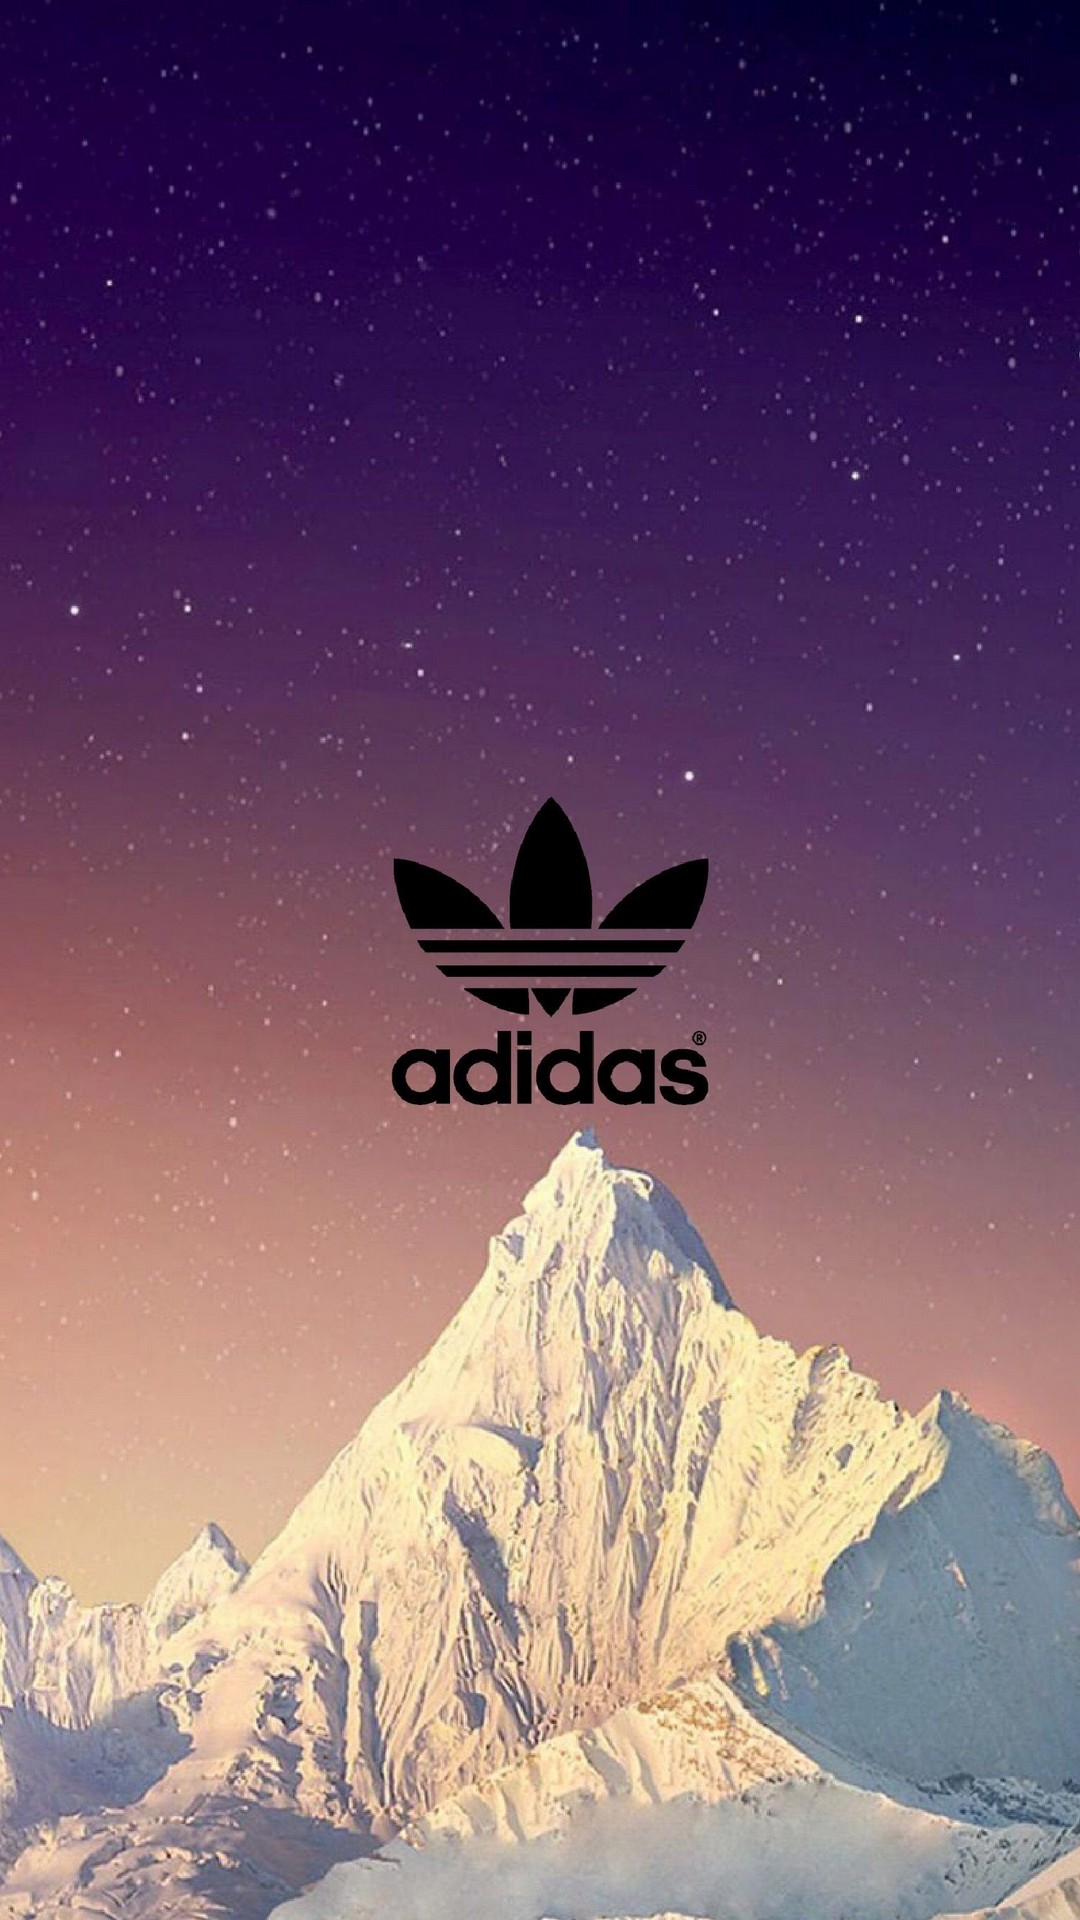 Adidas Wallpaper iPhone With high-resolution 1080X1920 pixel. You can use this wallpaper for your iPhone 5, 6, 7, 8, X, XS, XR backgrounds, Mobile Screensaver, or iPad Lock Screen